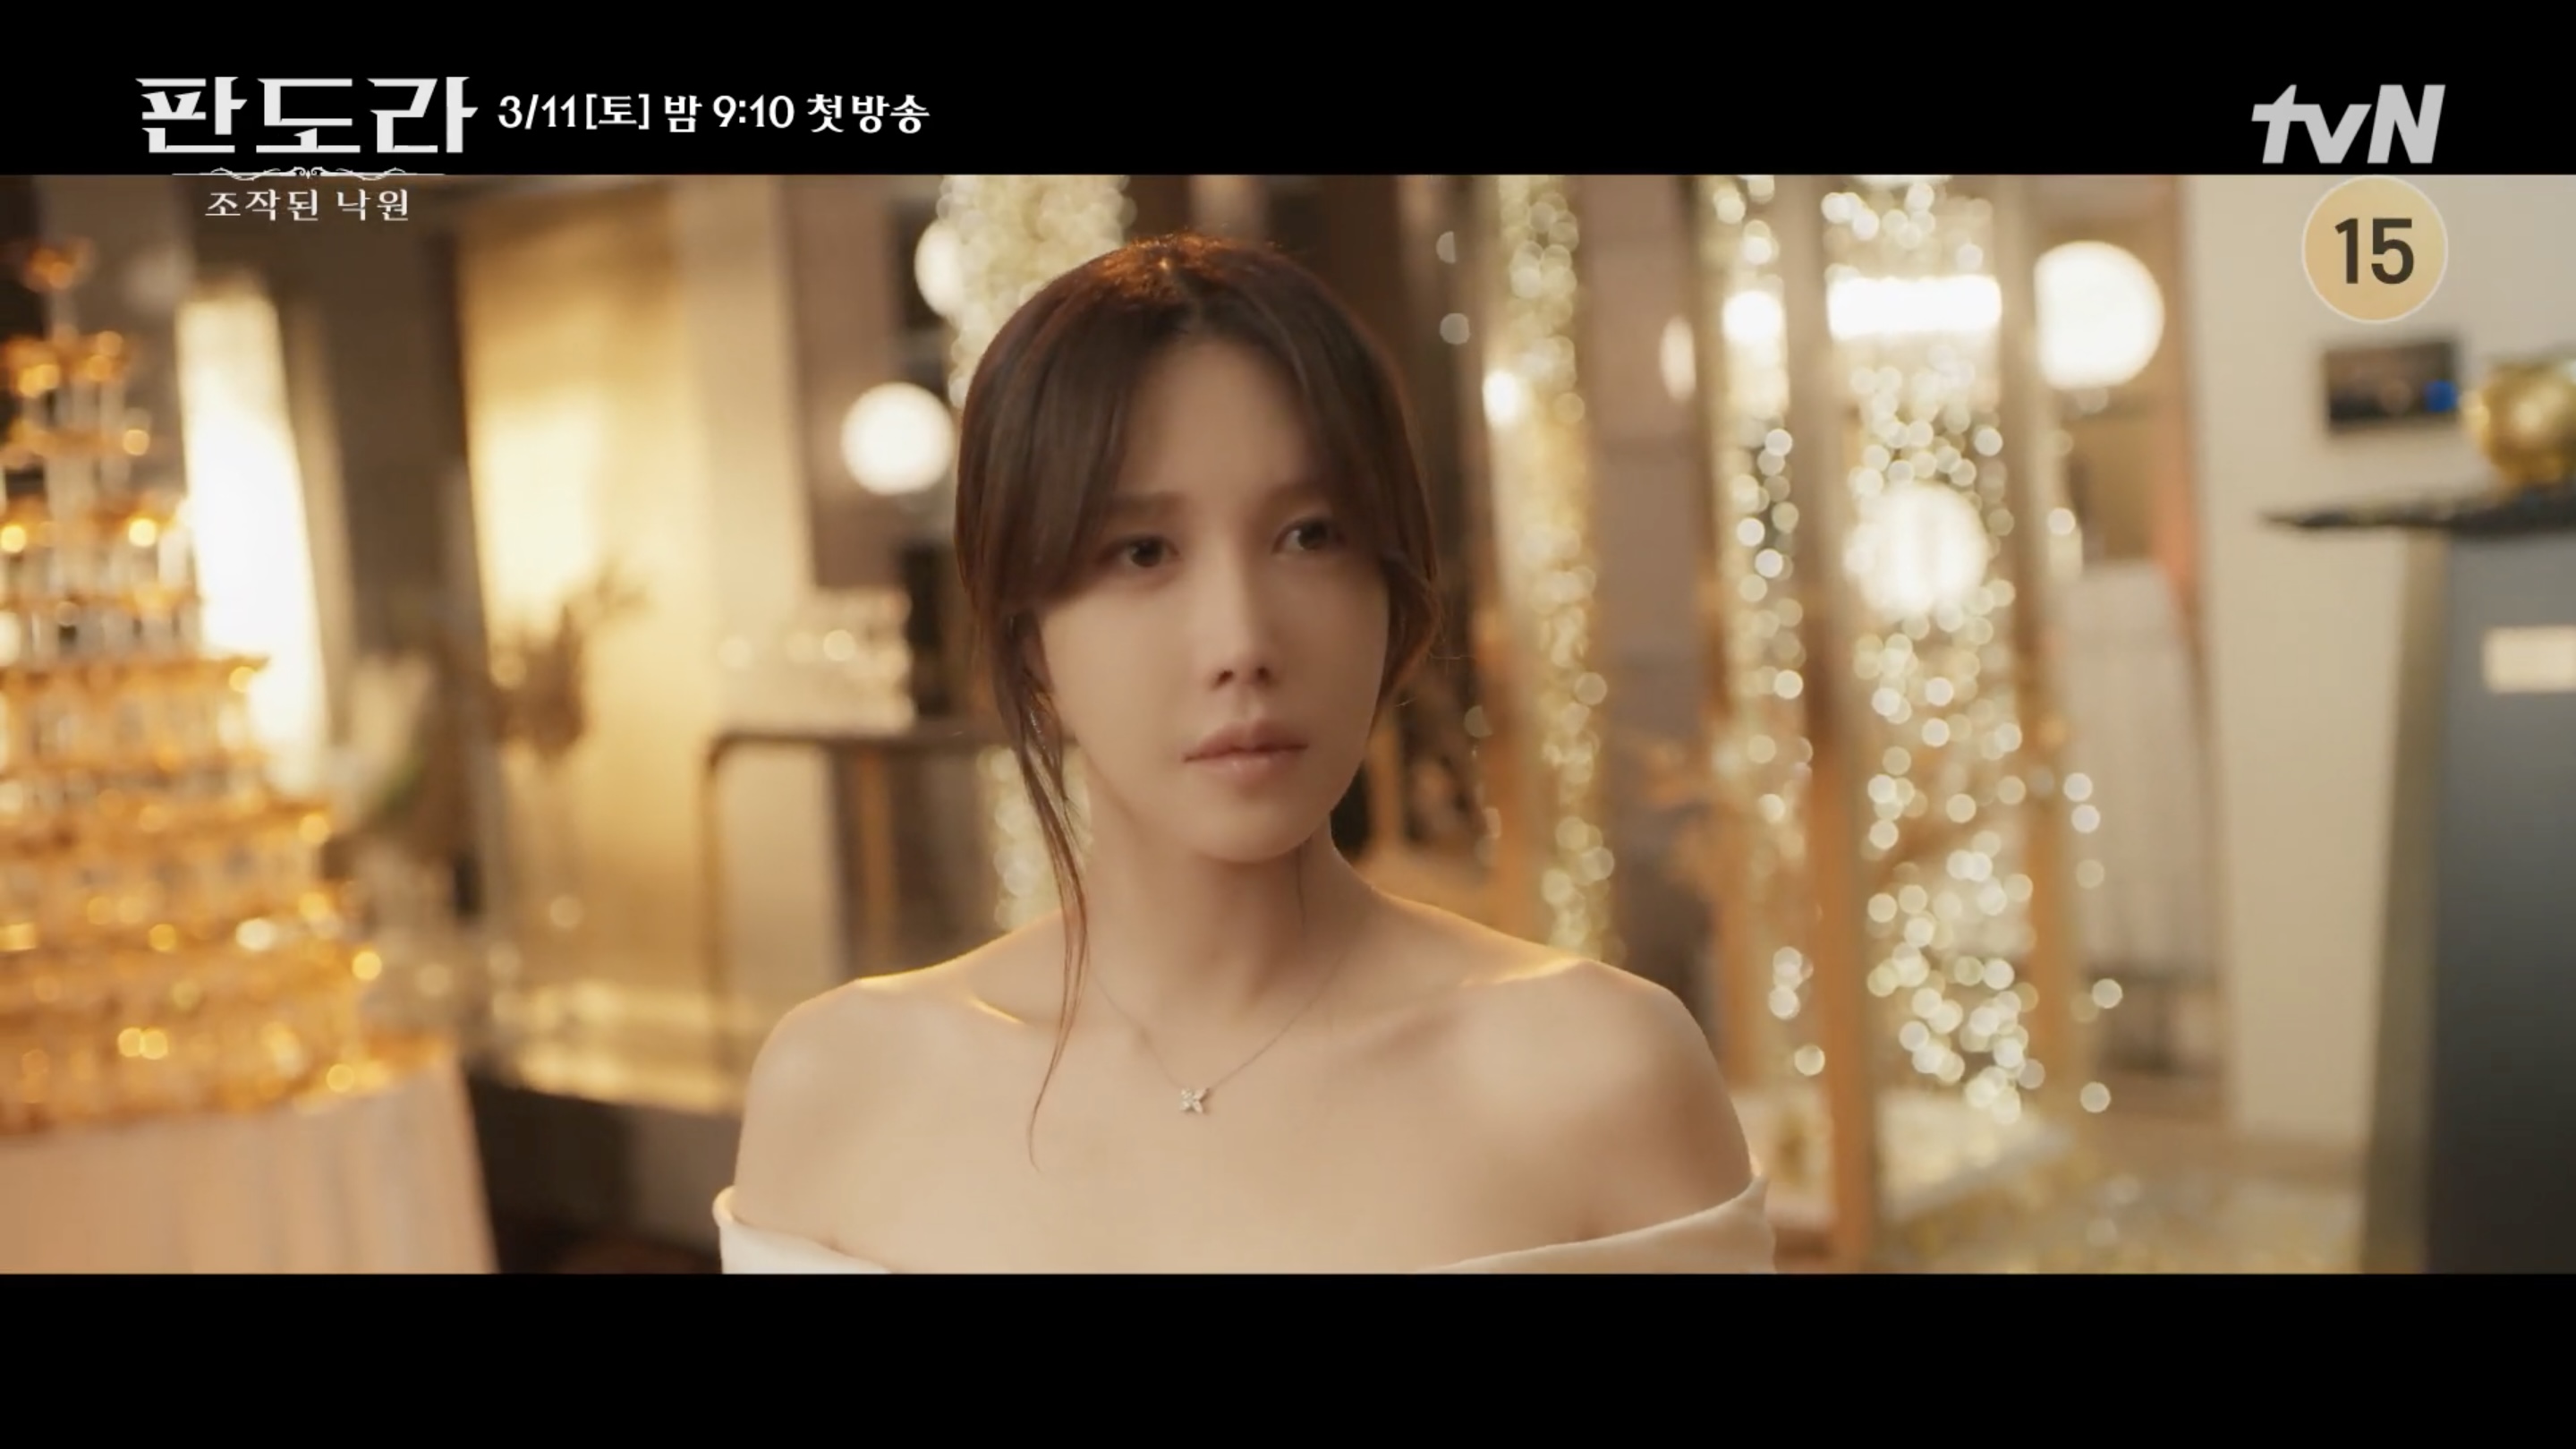 Lee Jia is faced with Pandora’s box in first teaser